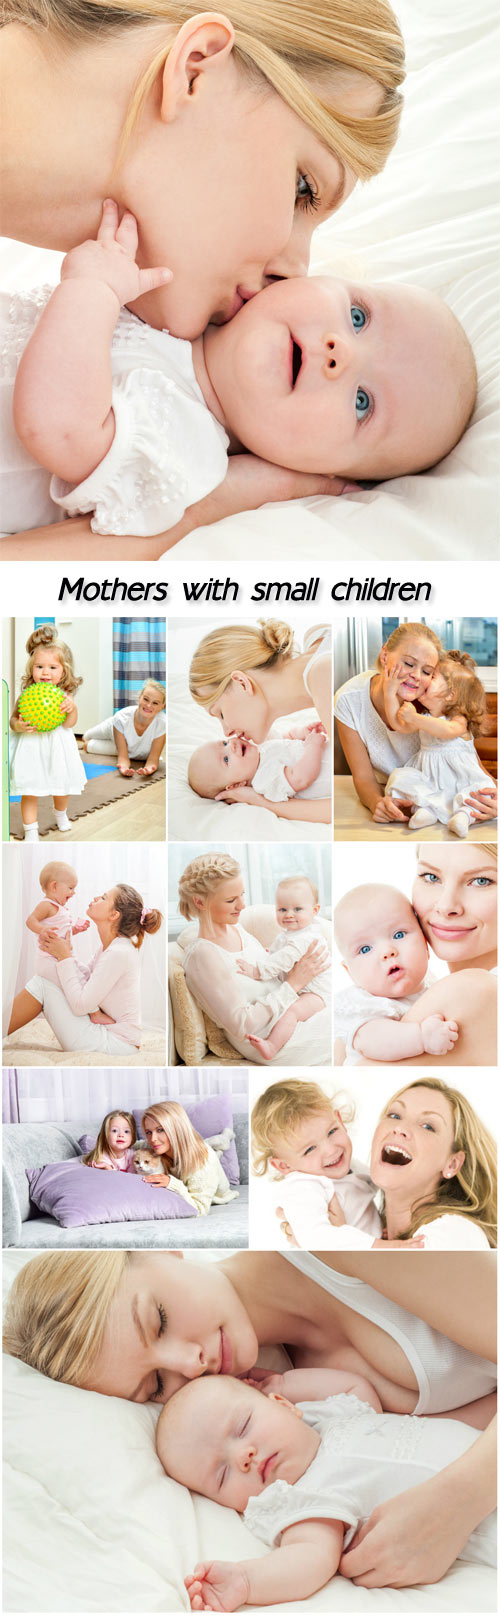 Young mothers with small children